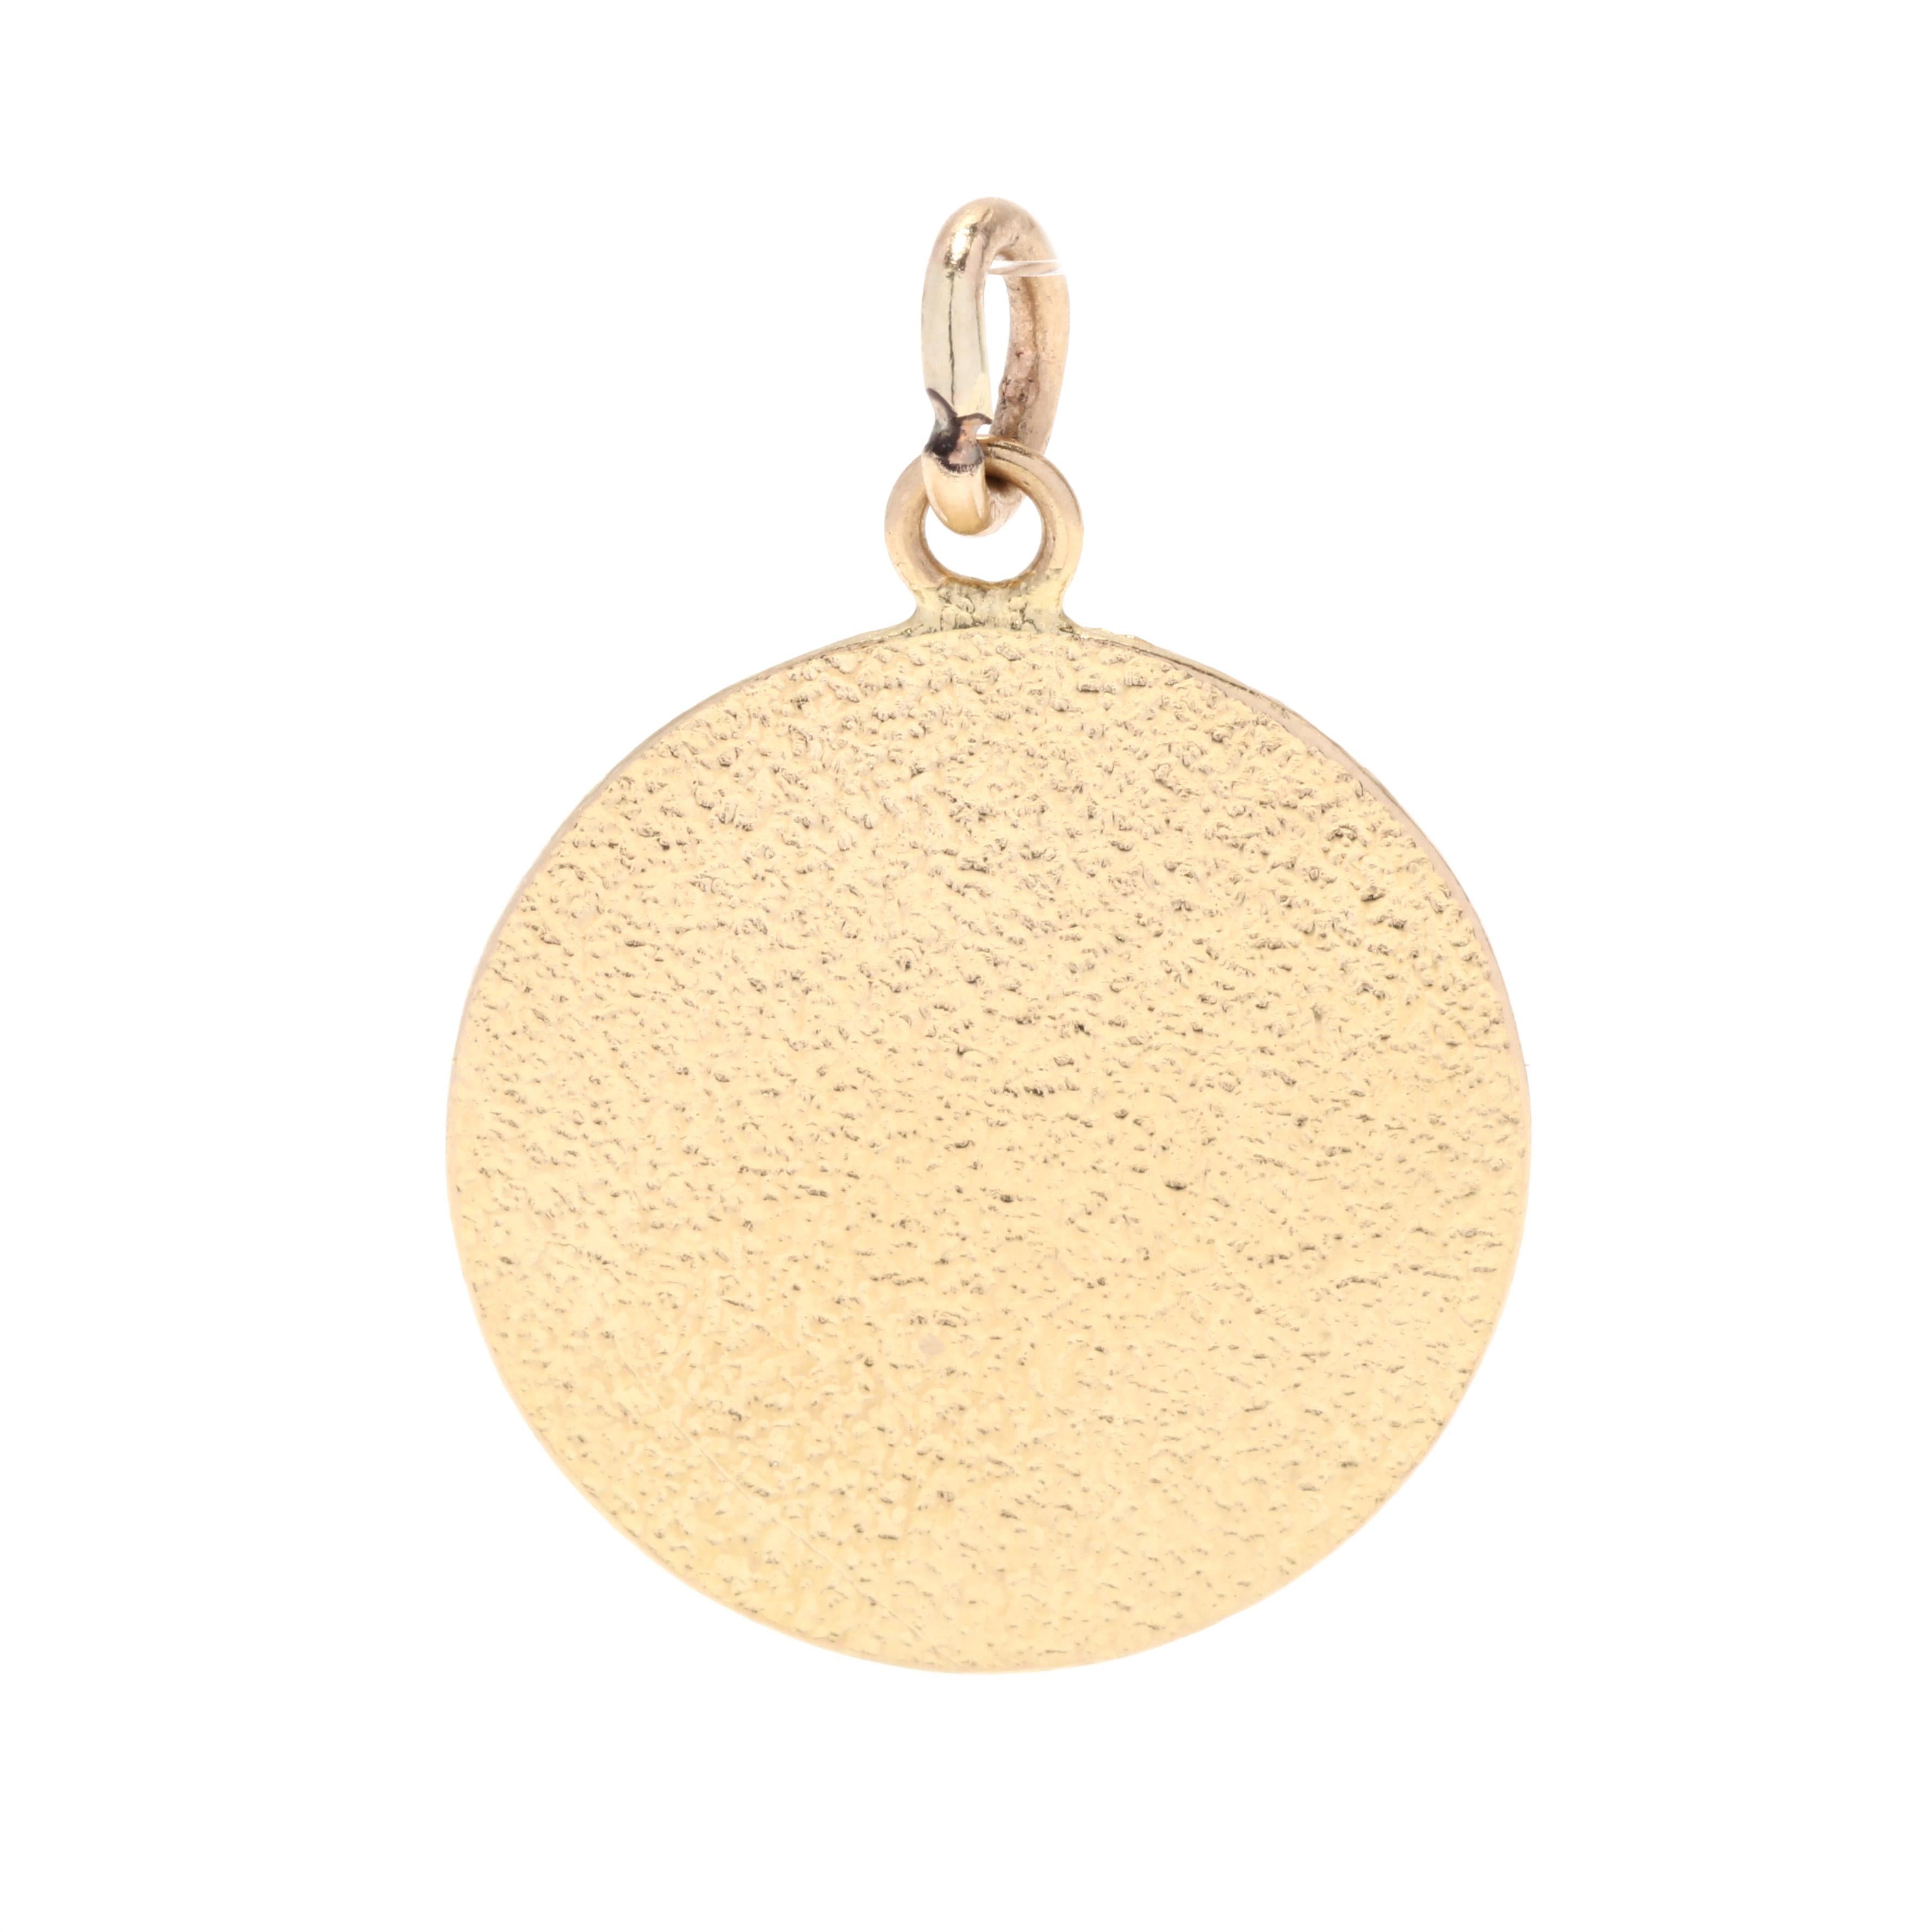 A vintage 14 karat yellow gold Canadian maple leaf charm. This round medallion charm features a raised maple leaf motif surrounded by a ridged border and with a thin bail.

Length: 7/8 in.

Width: 11/16 in.

Weight: 1.2 dwts. / 1.9 grams

Metal: